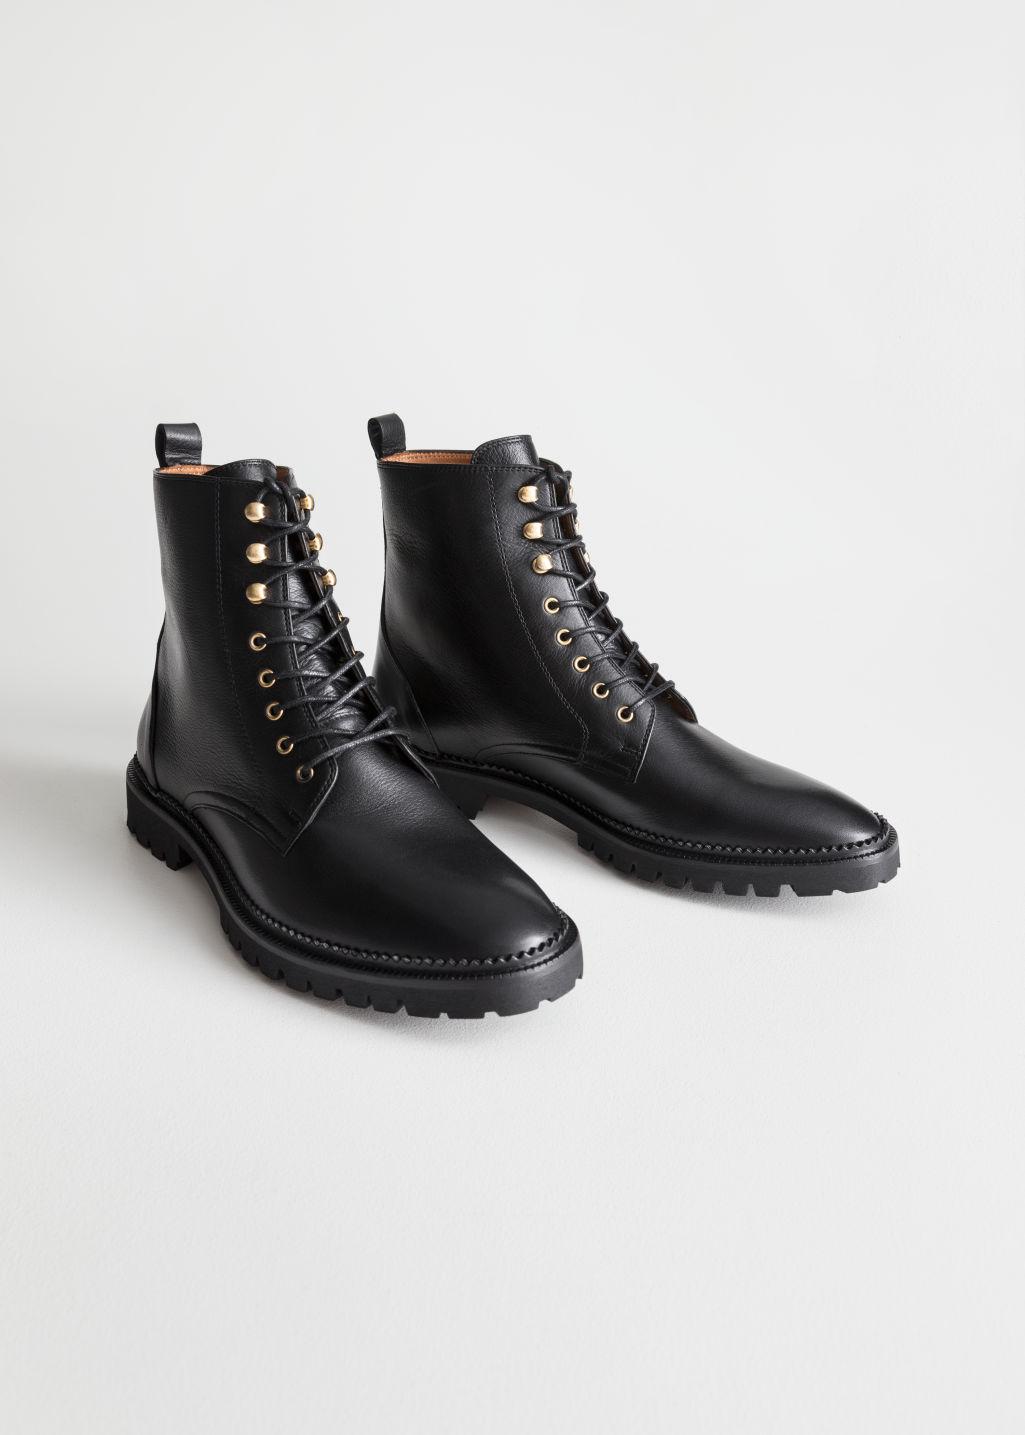 & Other Stories Lace-up Leather Boots in Black | Lyst